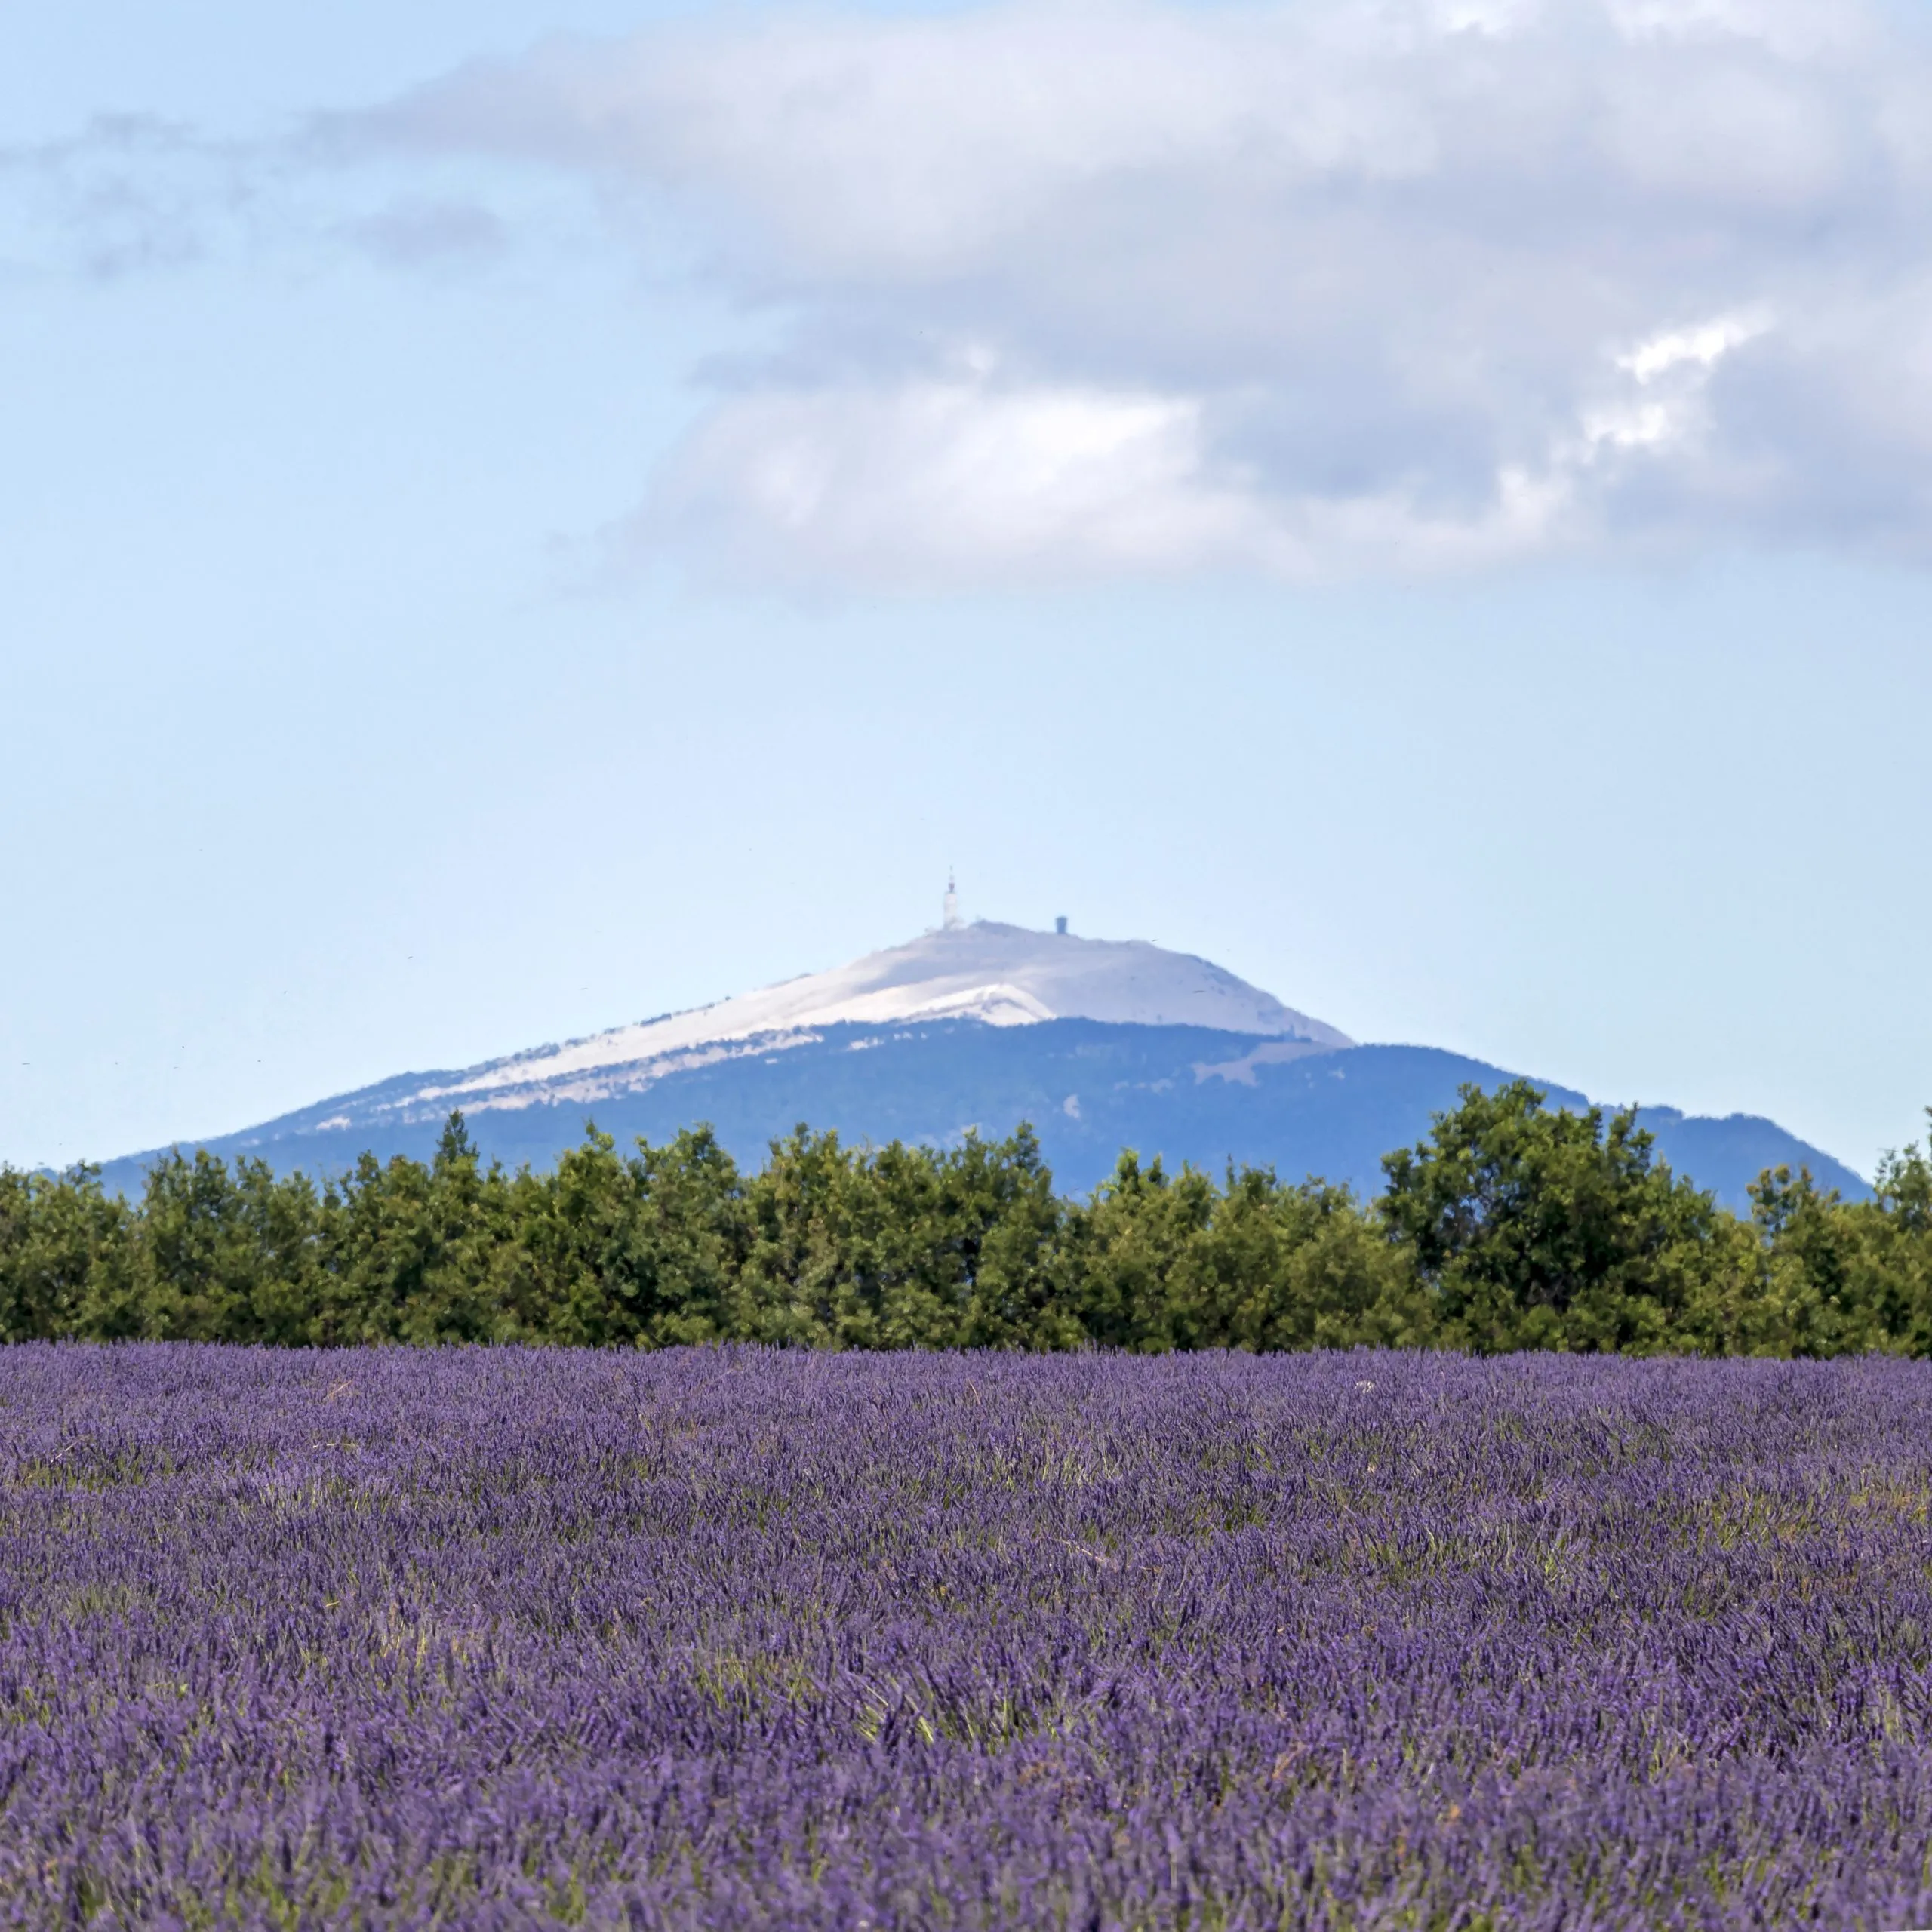 Blurred background with lavender fields and Mont Ventoux in the distance, South France